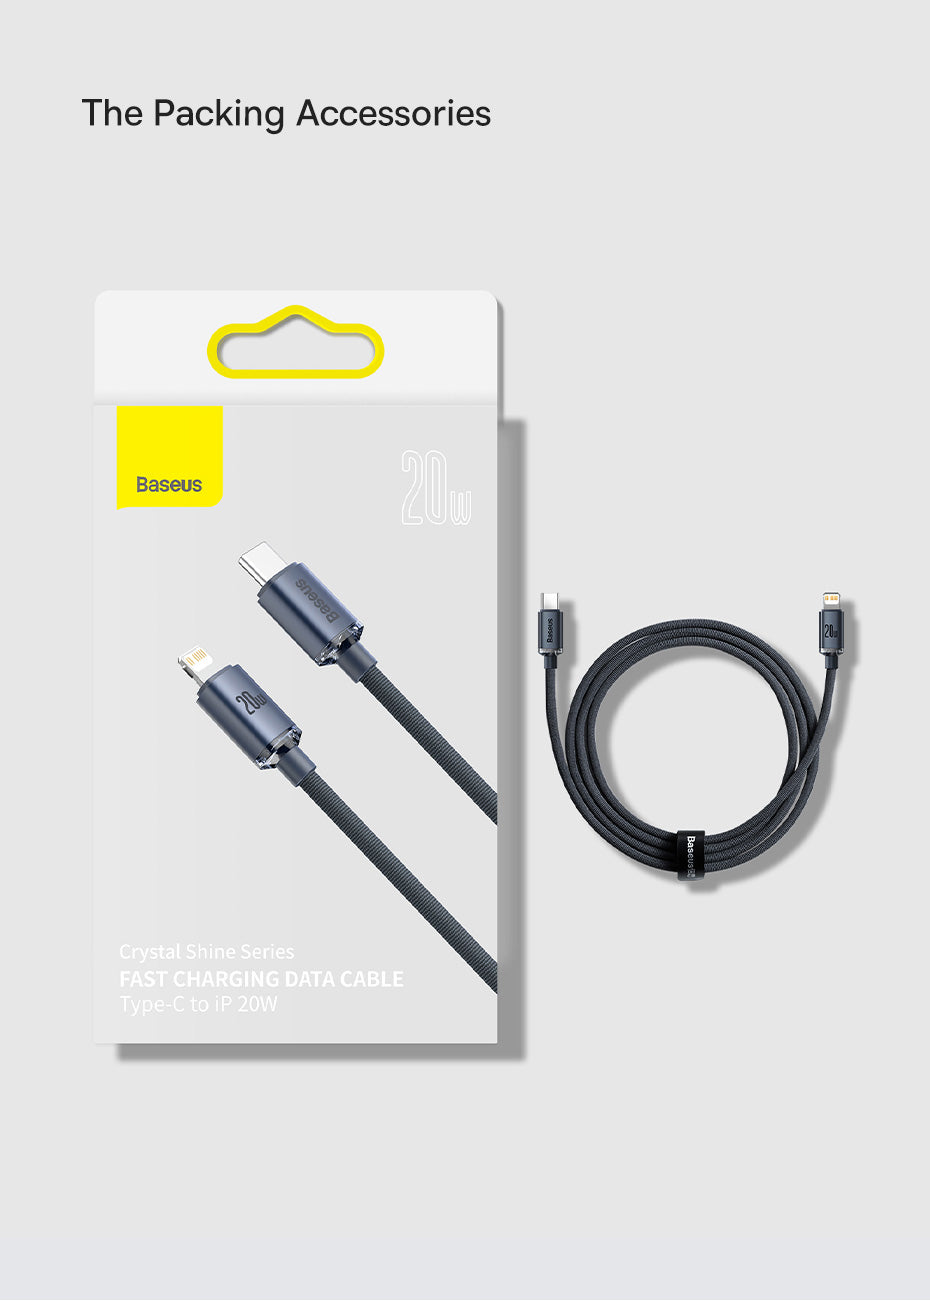 Baseus PD 20W USB C to Lightning Cable Data Transmission Cable